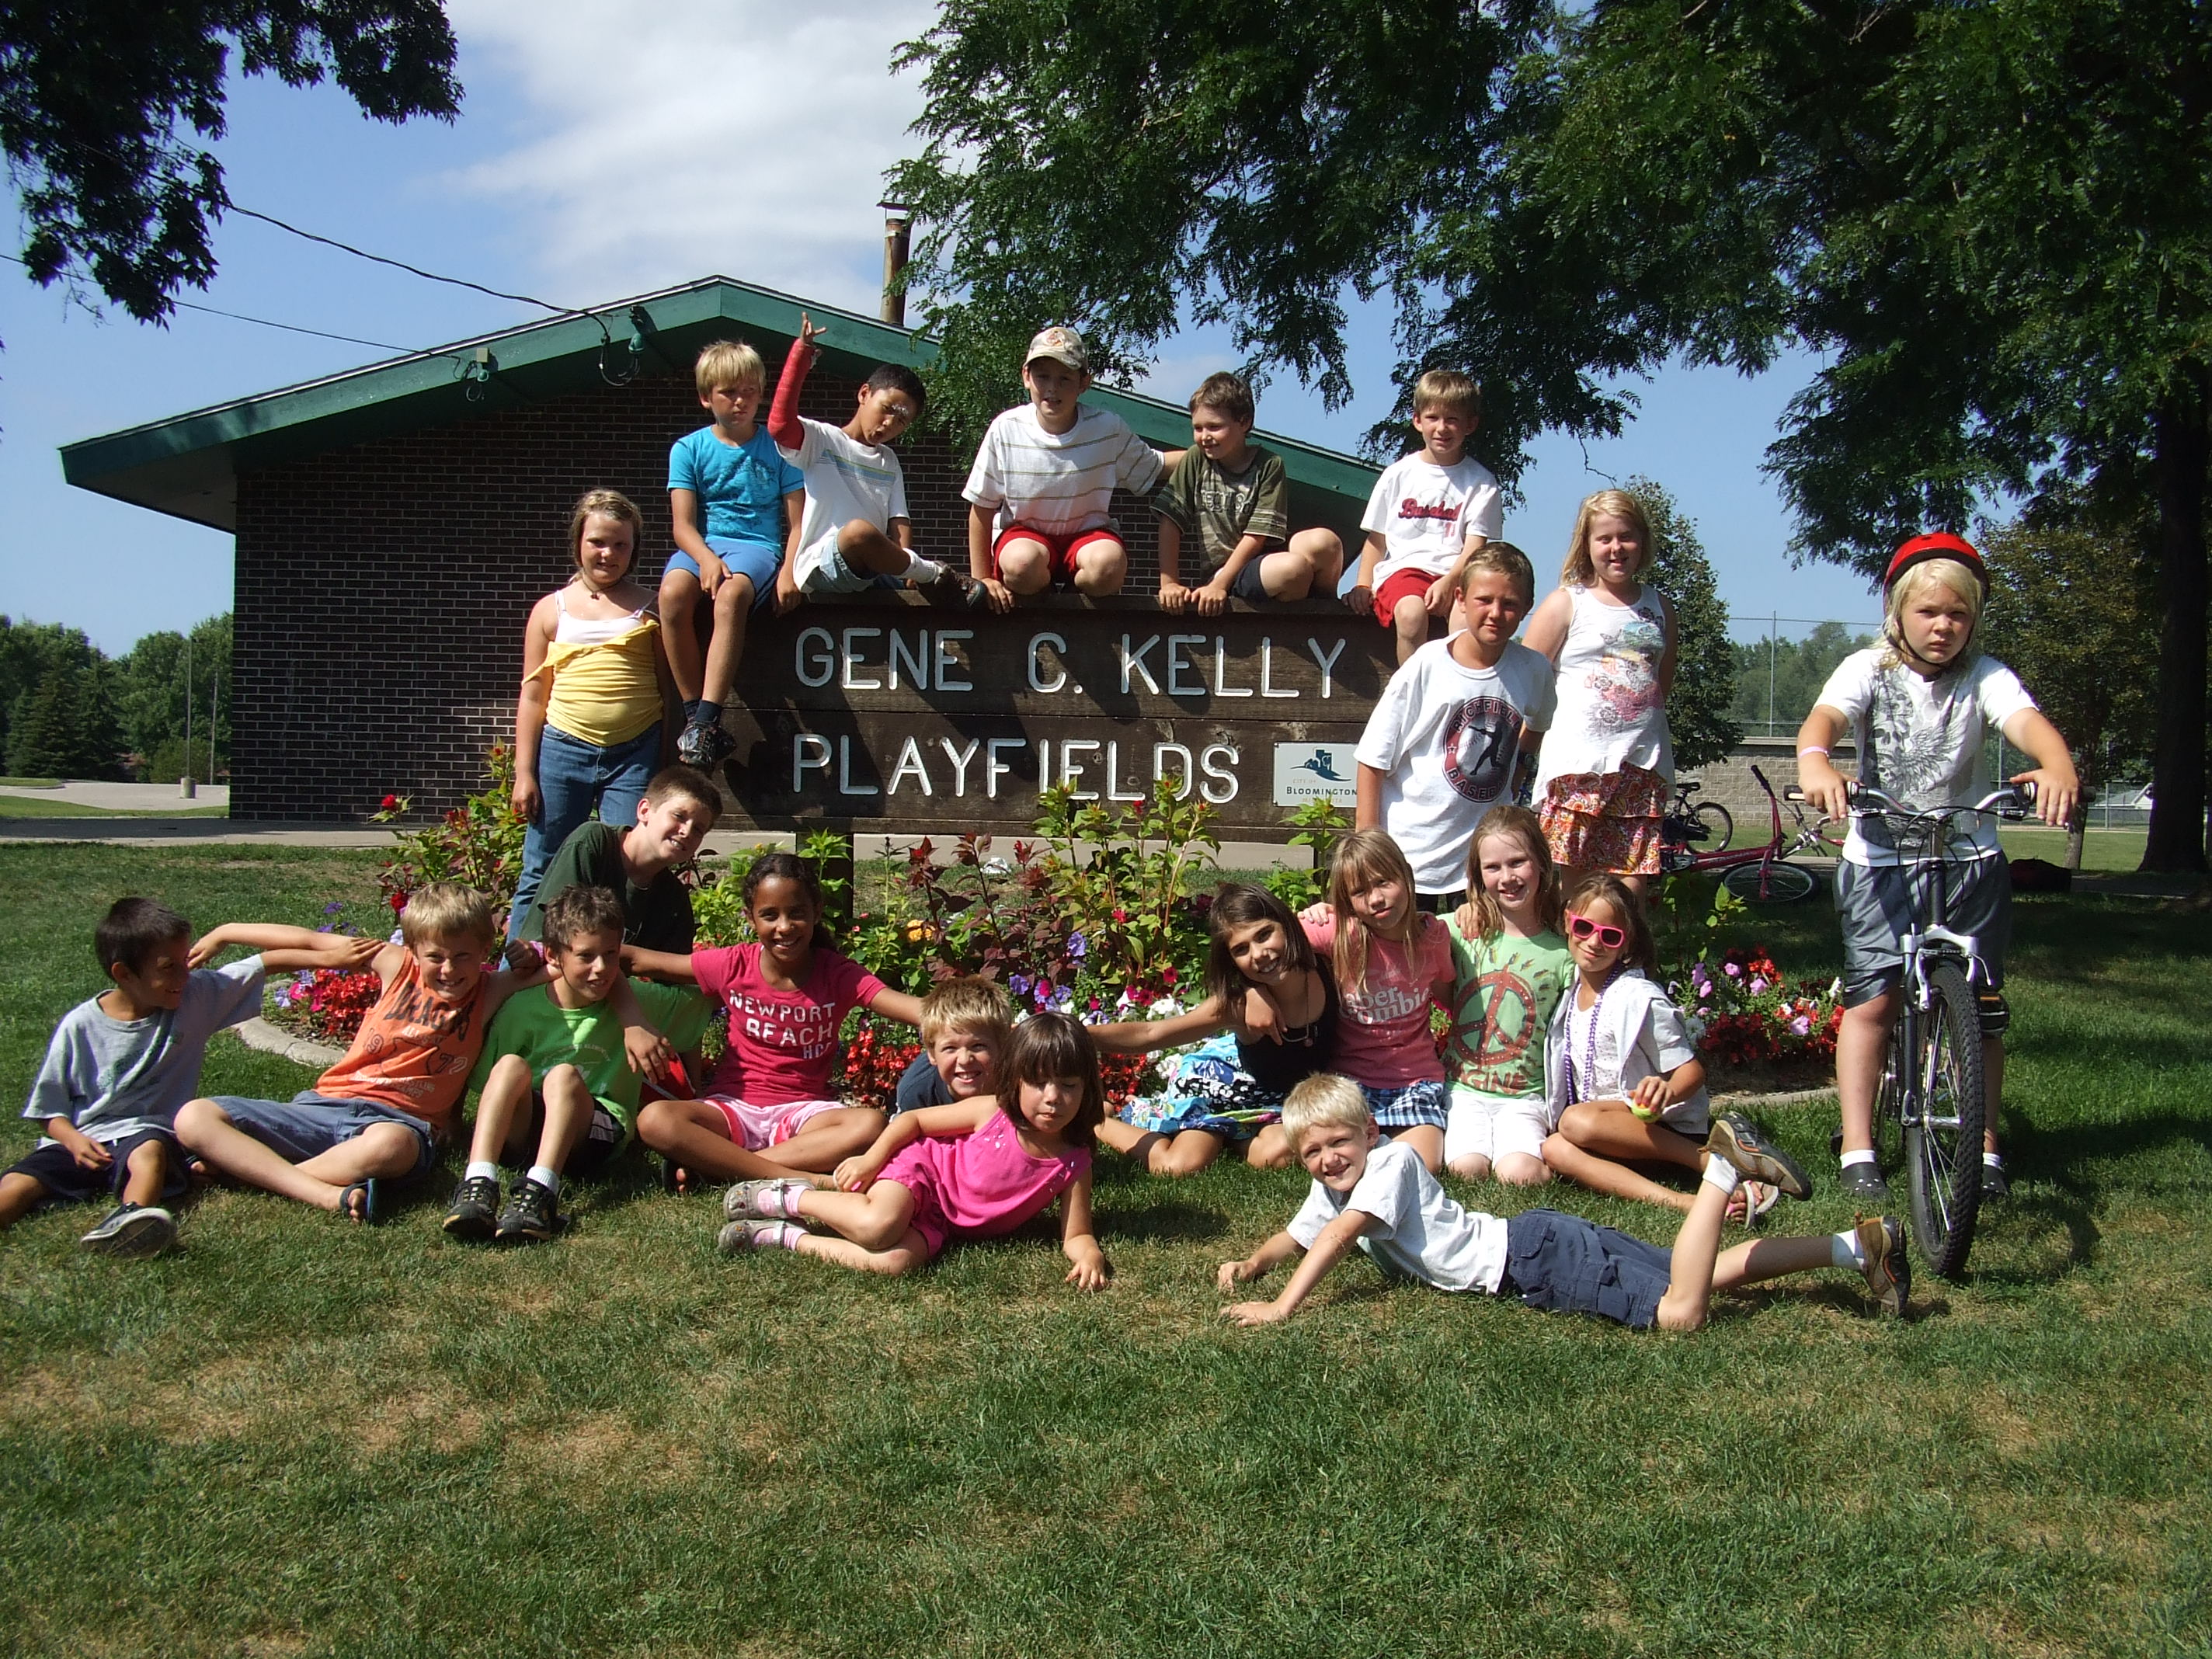 Gene Kelly Park Playfield sign with Kids